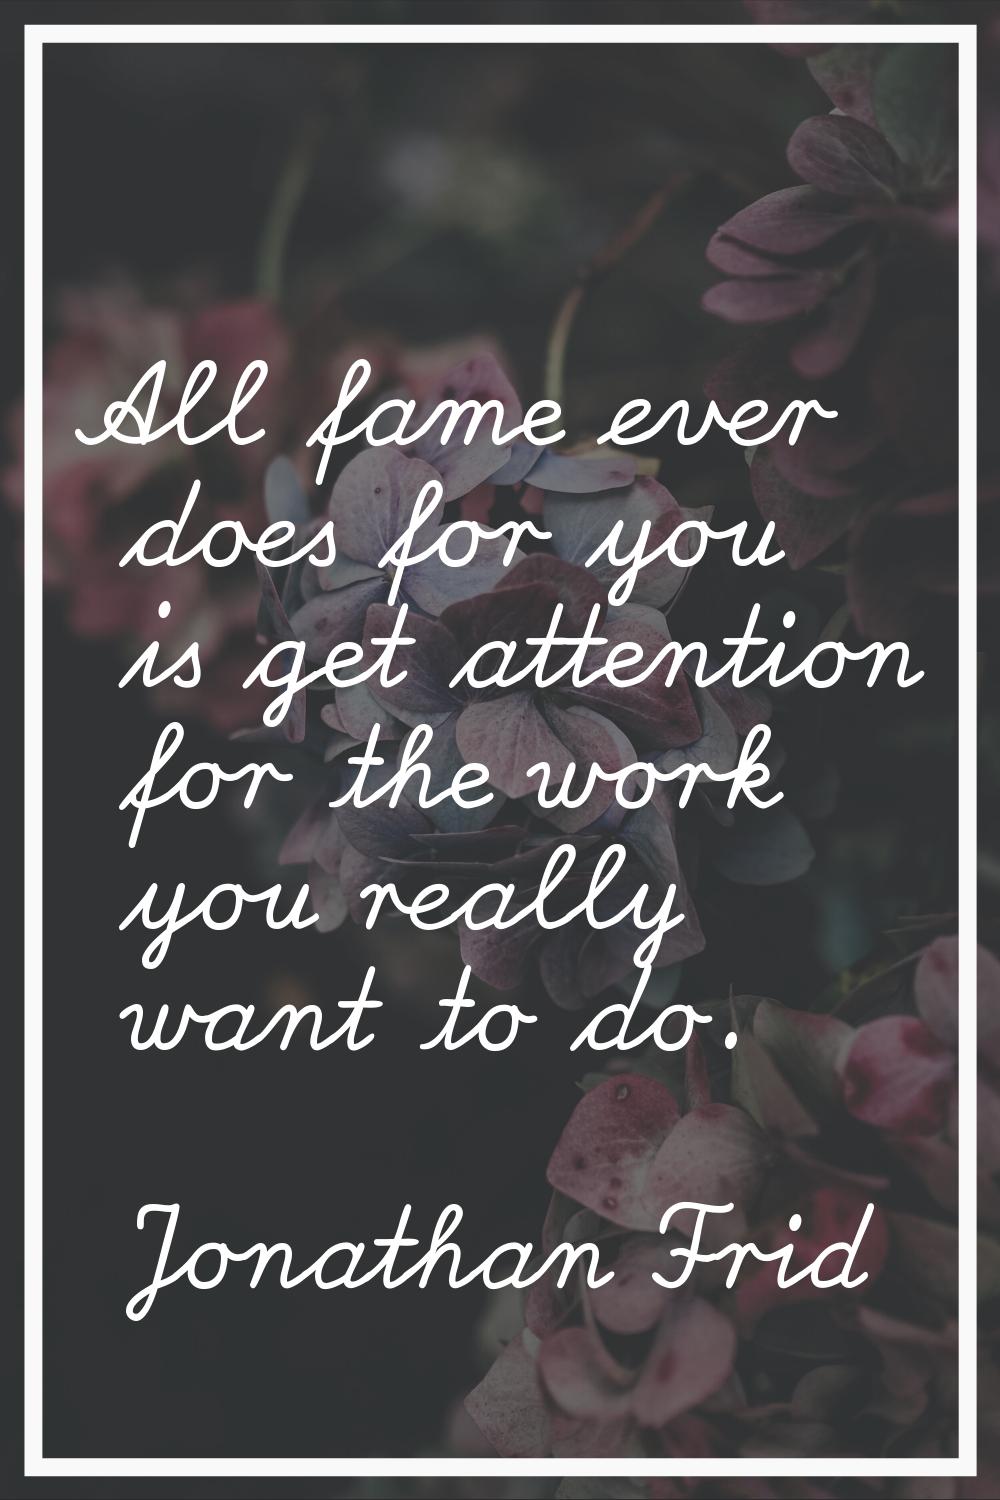 All fame ever does for you is get attention for the work you really want to do.